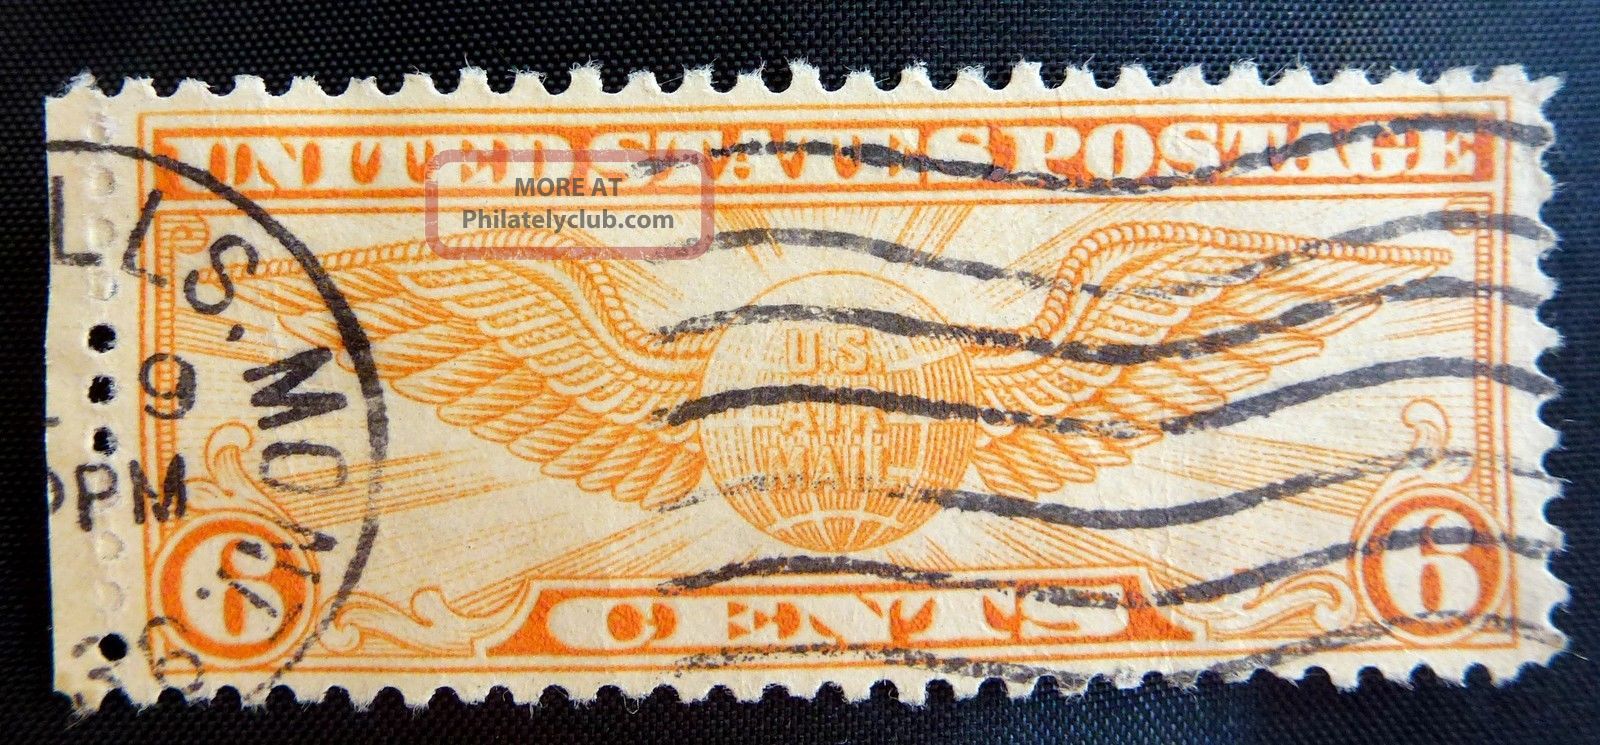 us airmail 10 cent stamp